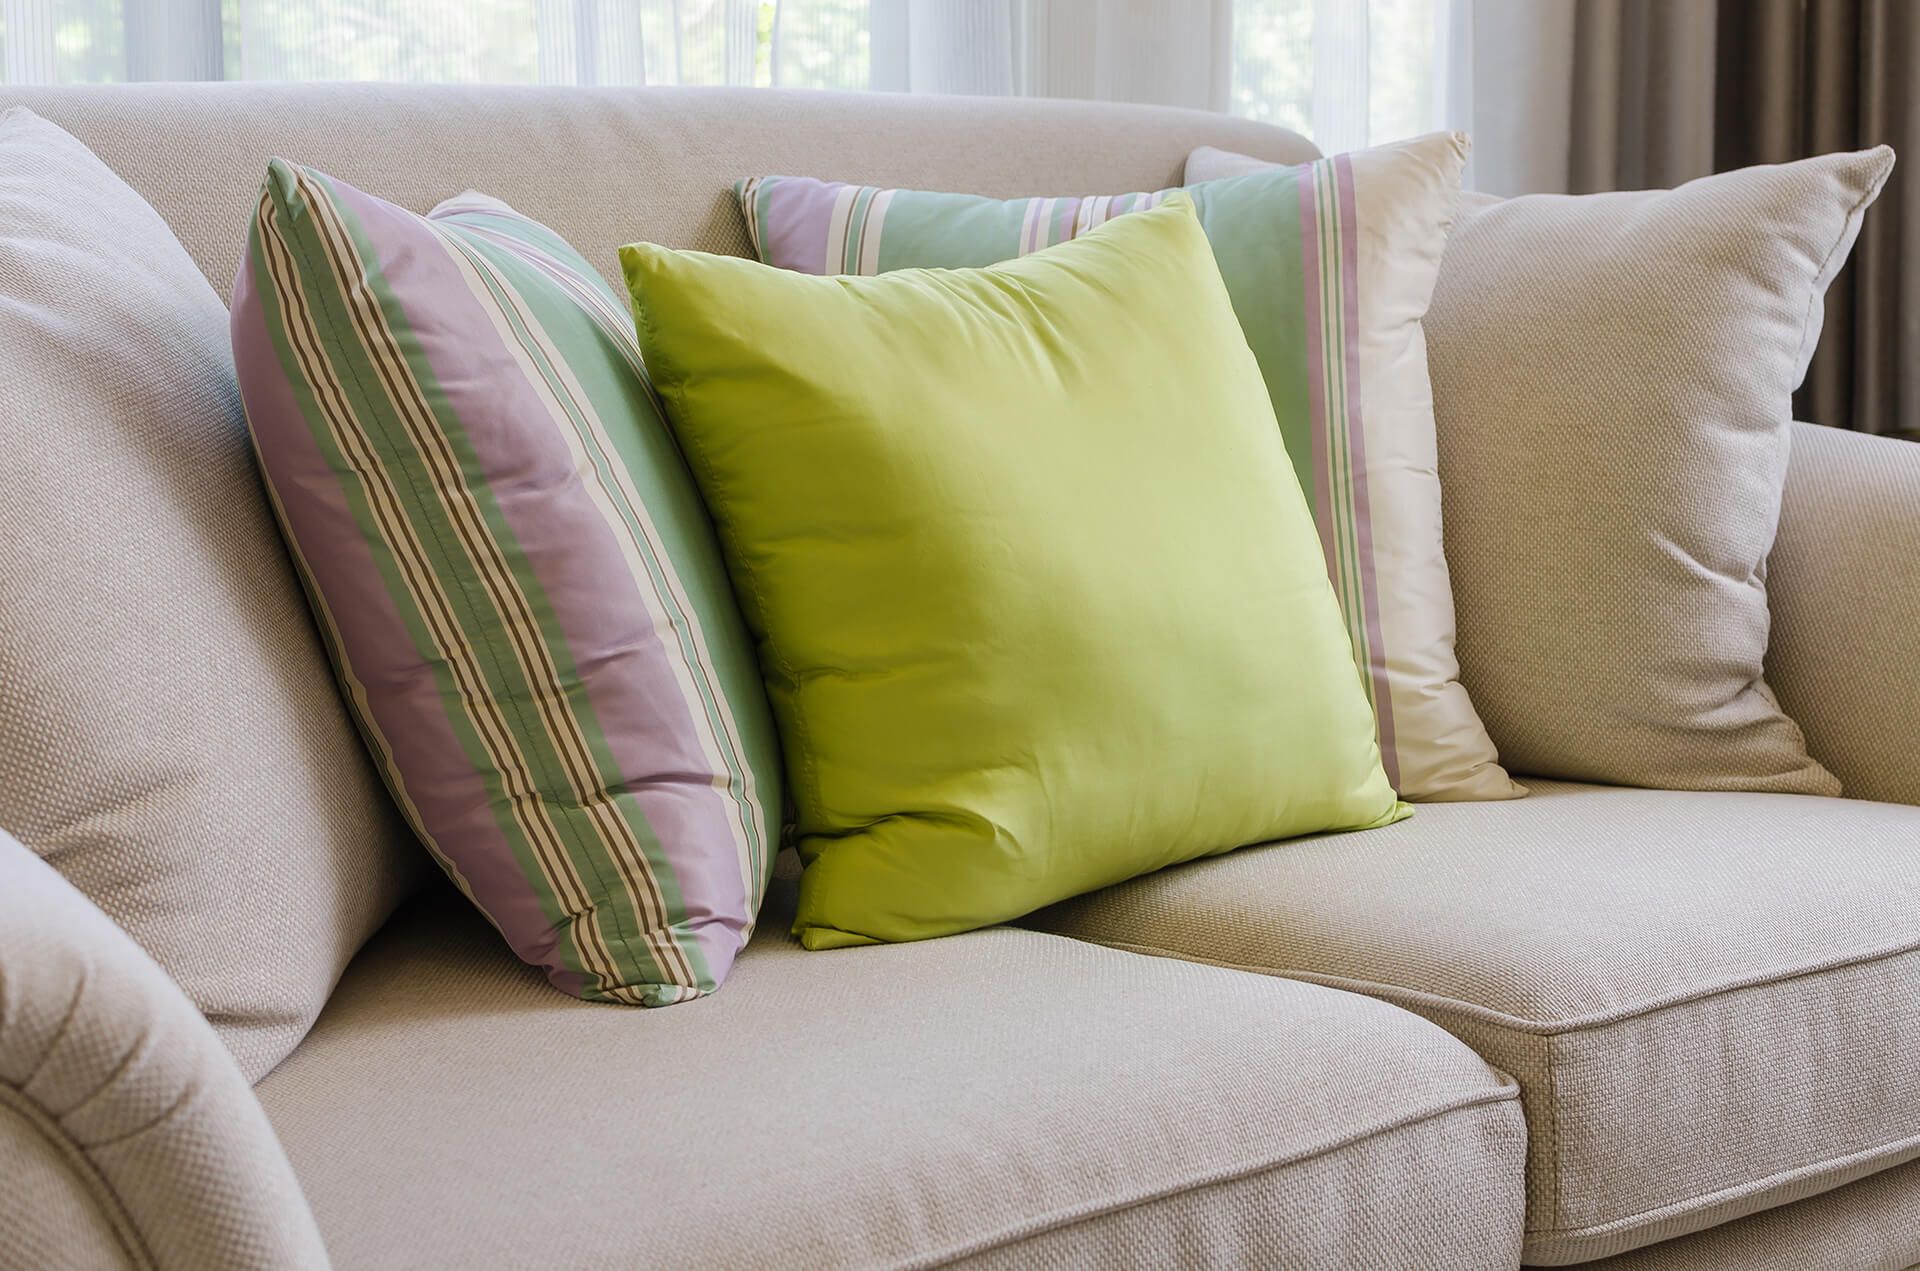 Cushion Cover Cleaning